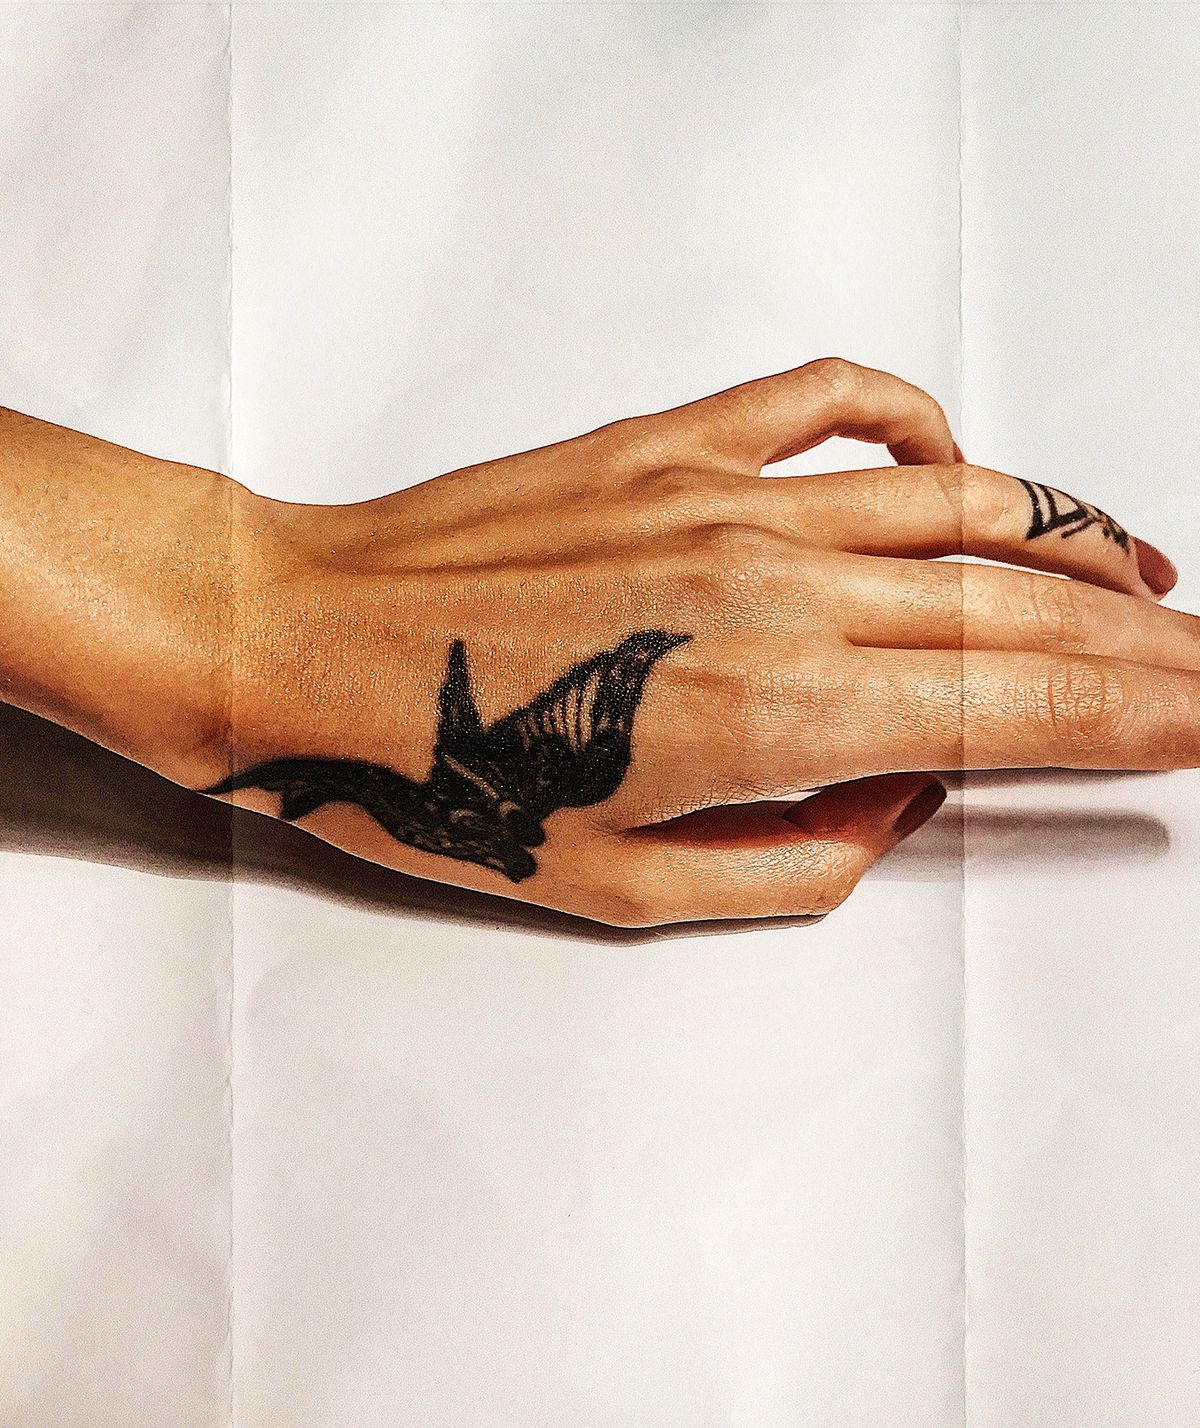 15 Delicate Tattoo Ideas to Add to Your Inspiration Board